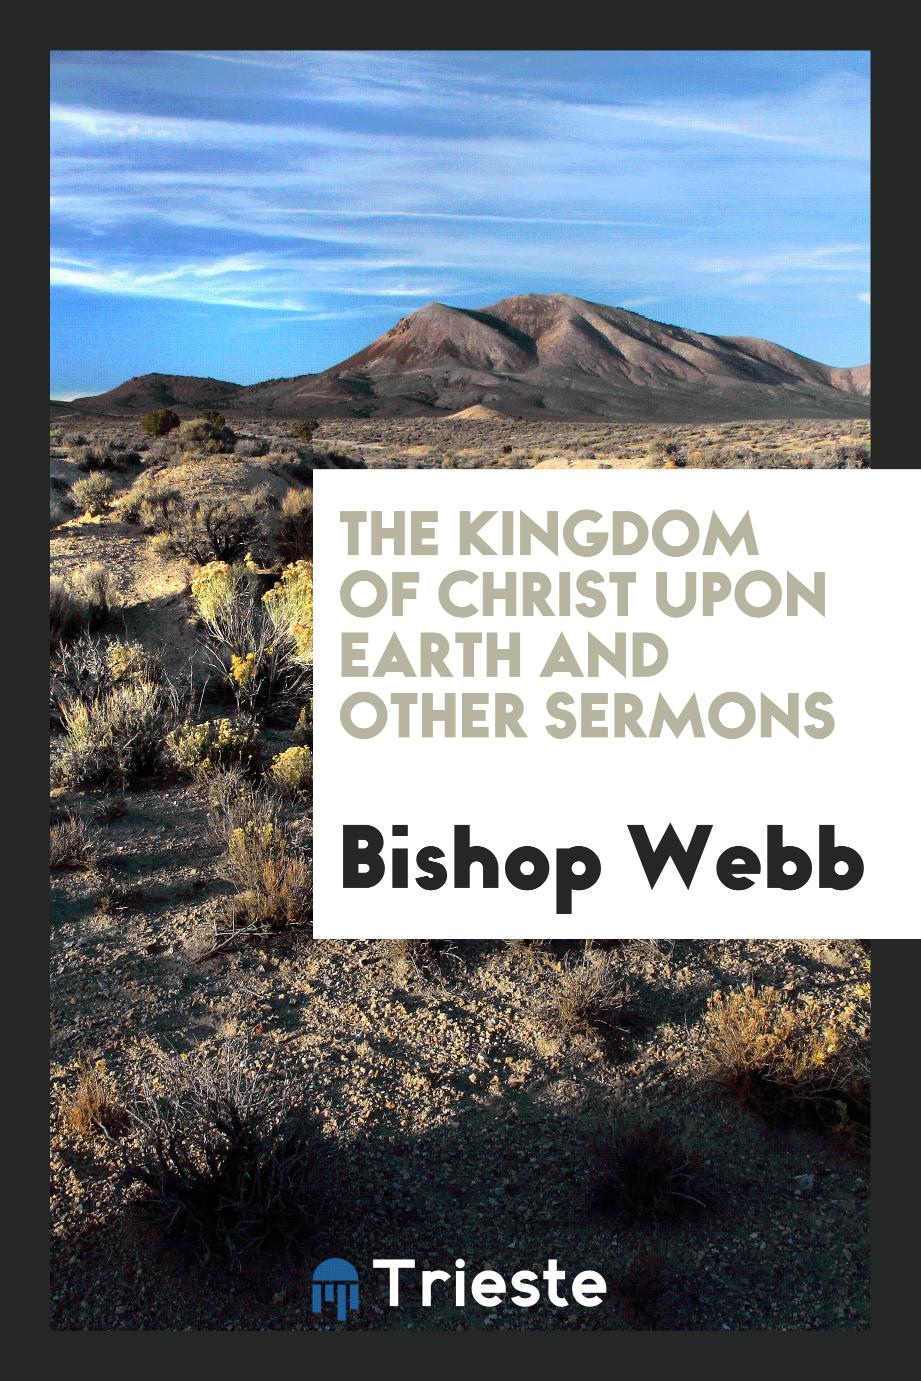 The kingdom of Christ upon earth and other sermons